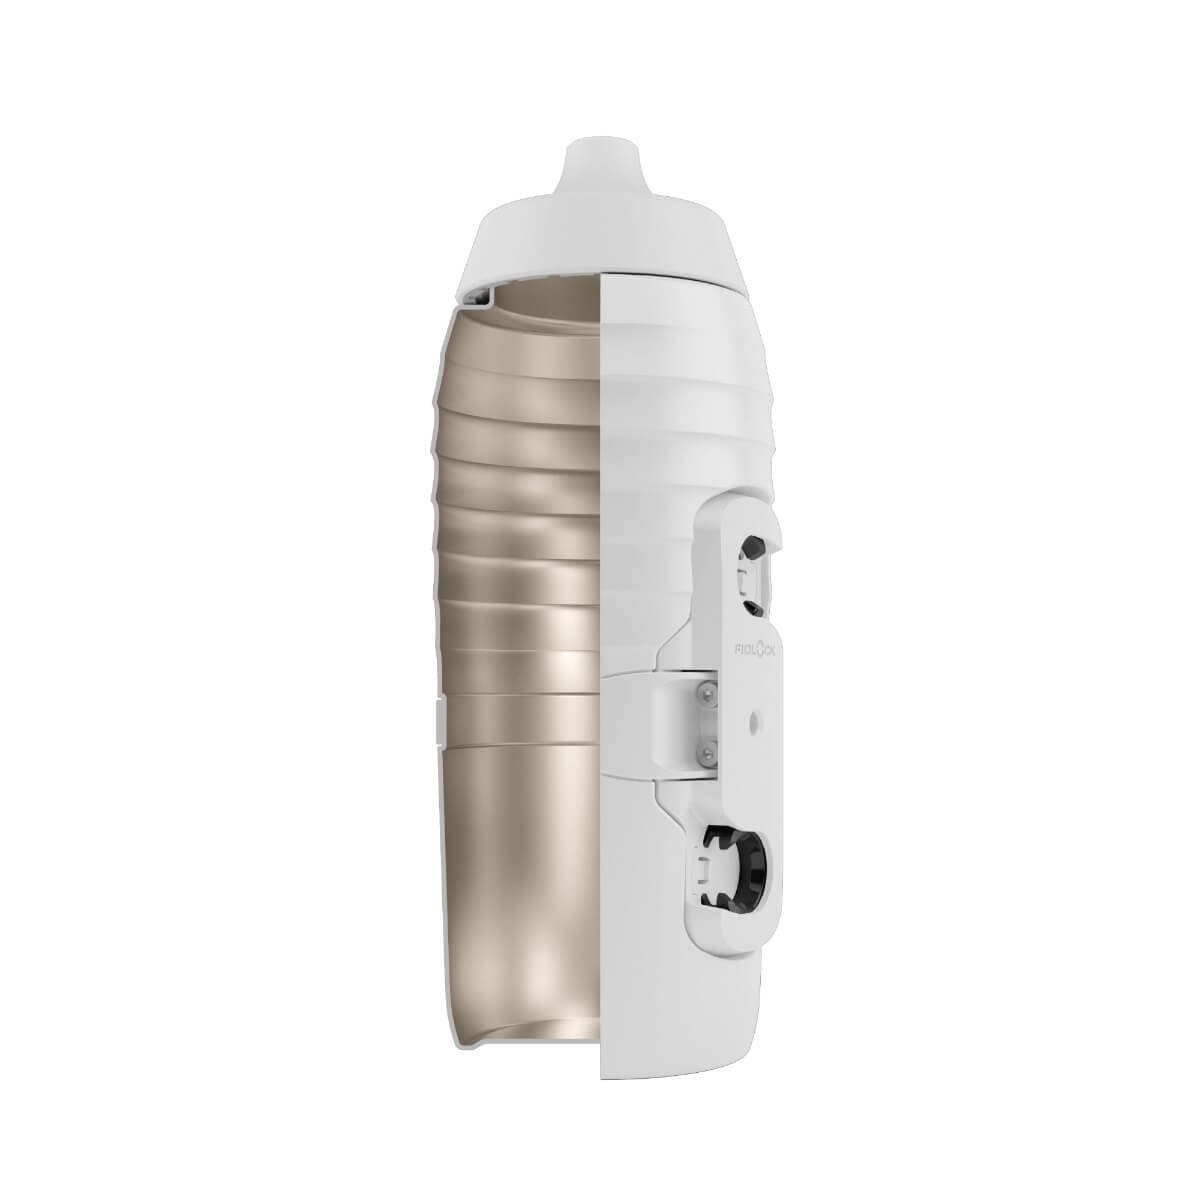 Cut of white bicycle bottle TWIST x KEEGO 0.6L with visible titanium interior